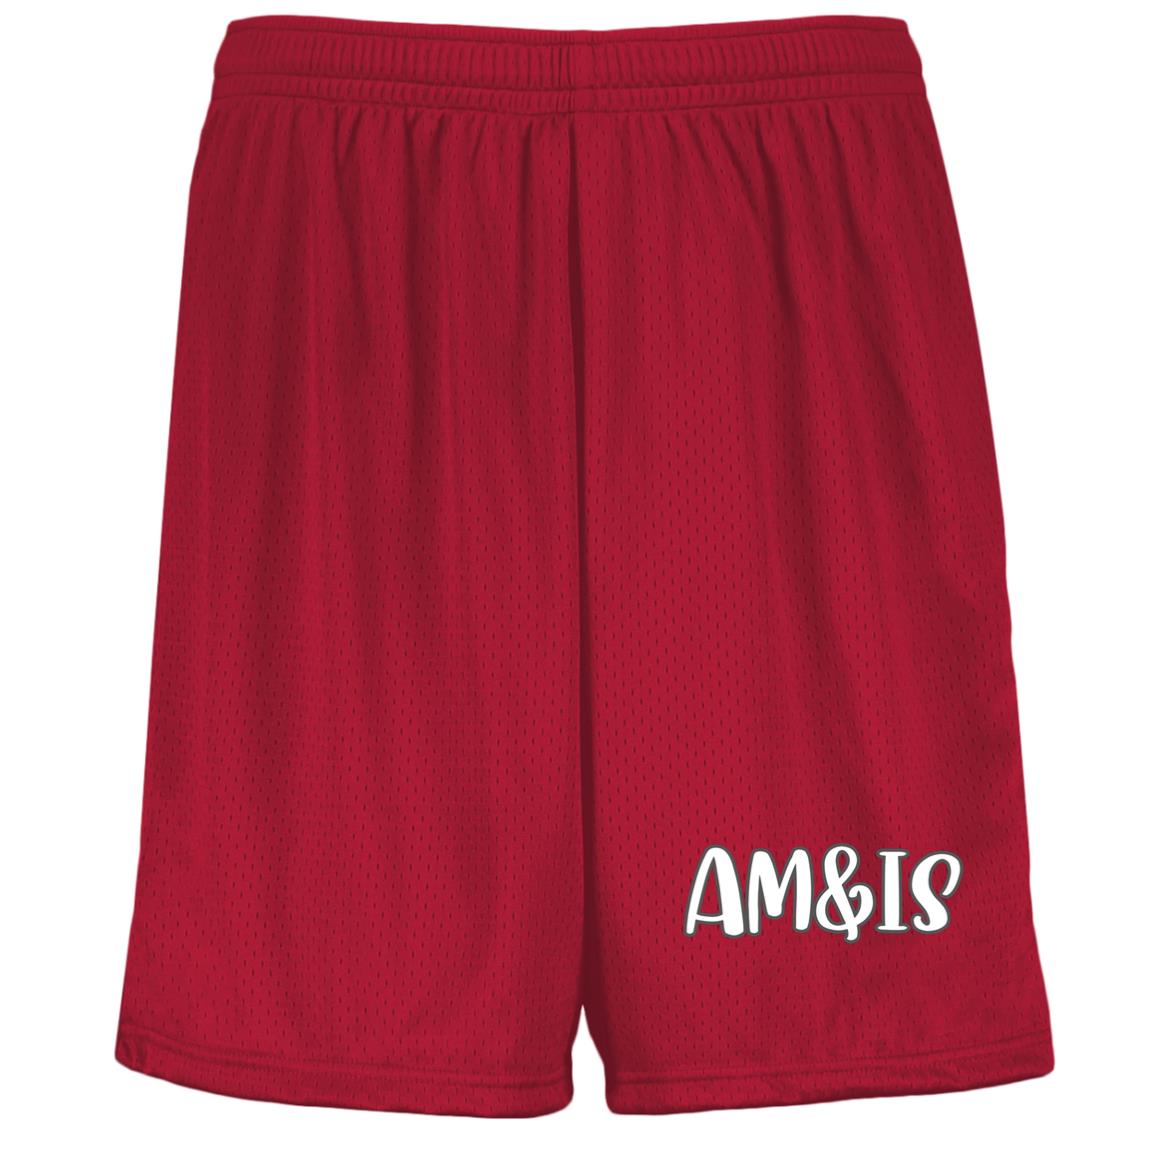 SCARLET - AM&IS Activewear Youth Moisture-Wicking Mesh Shorts - kids shorts at TFC&H Co.